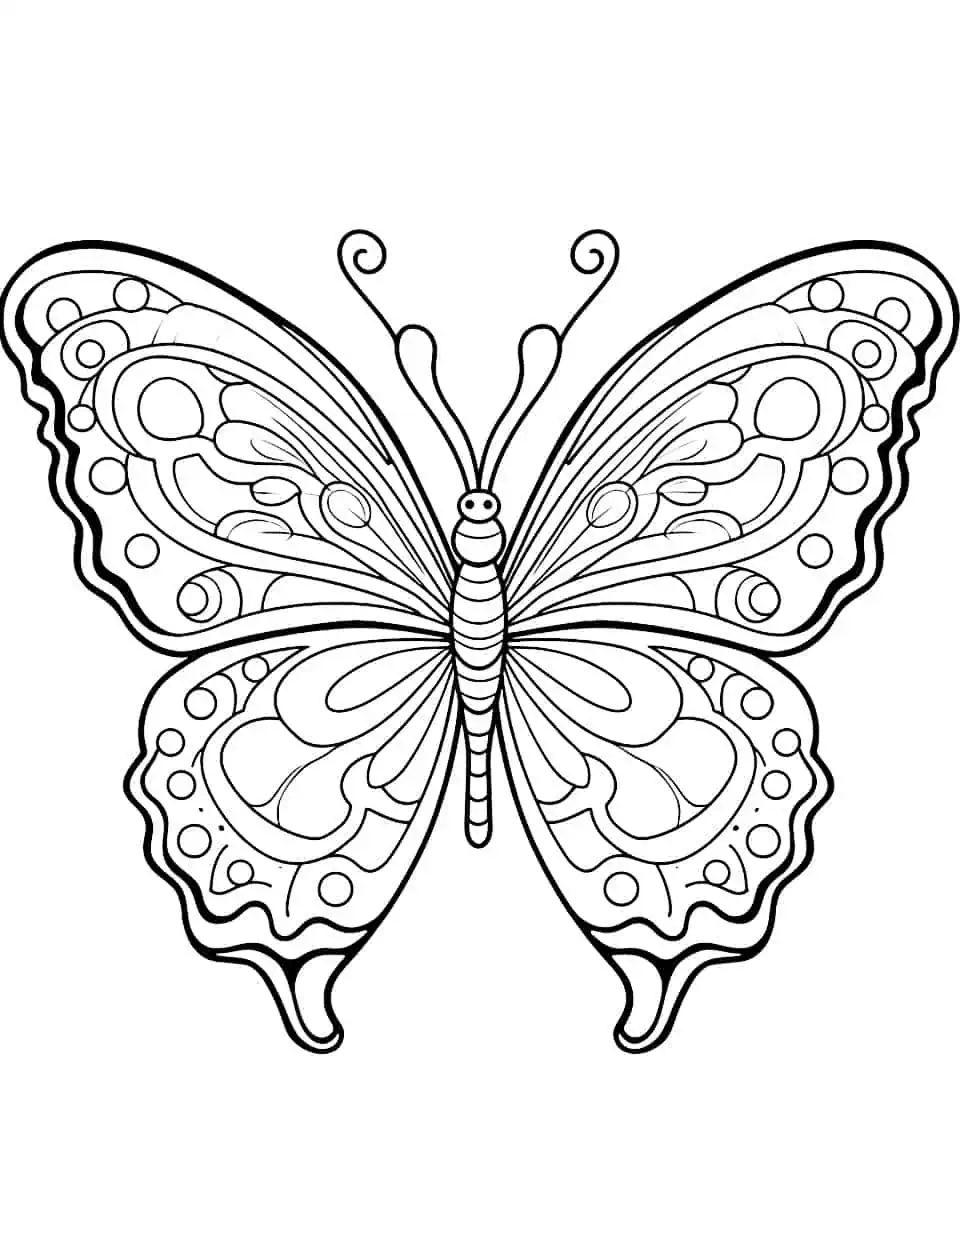 Delicate Details Butterfly Coloring Page - A coloring page showcasing a butterfly with intricate wing patterns and delicate features.